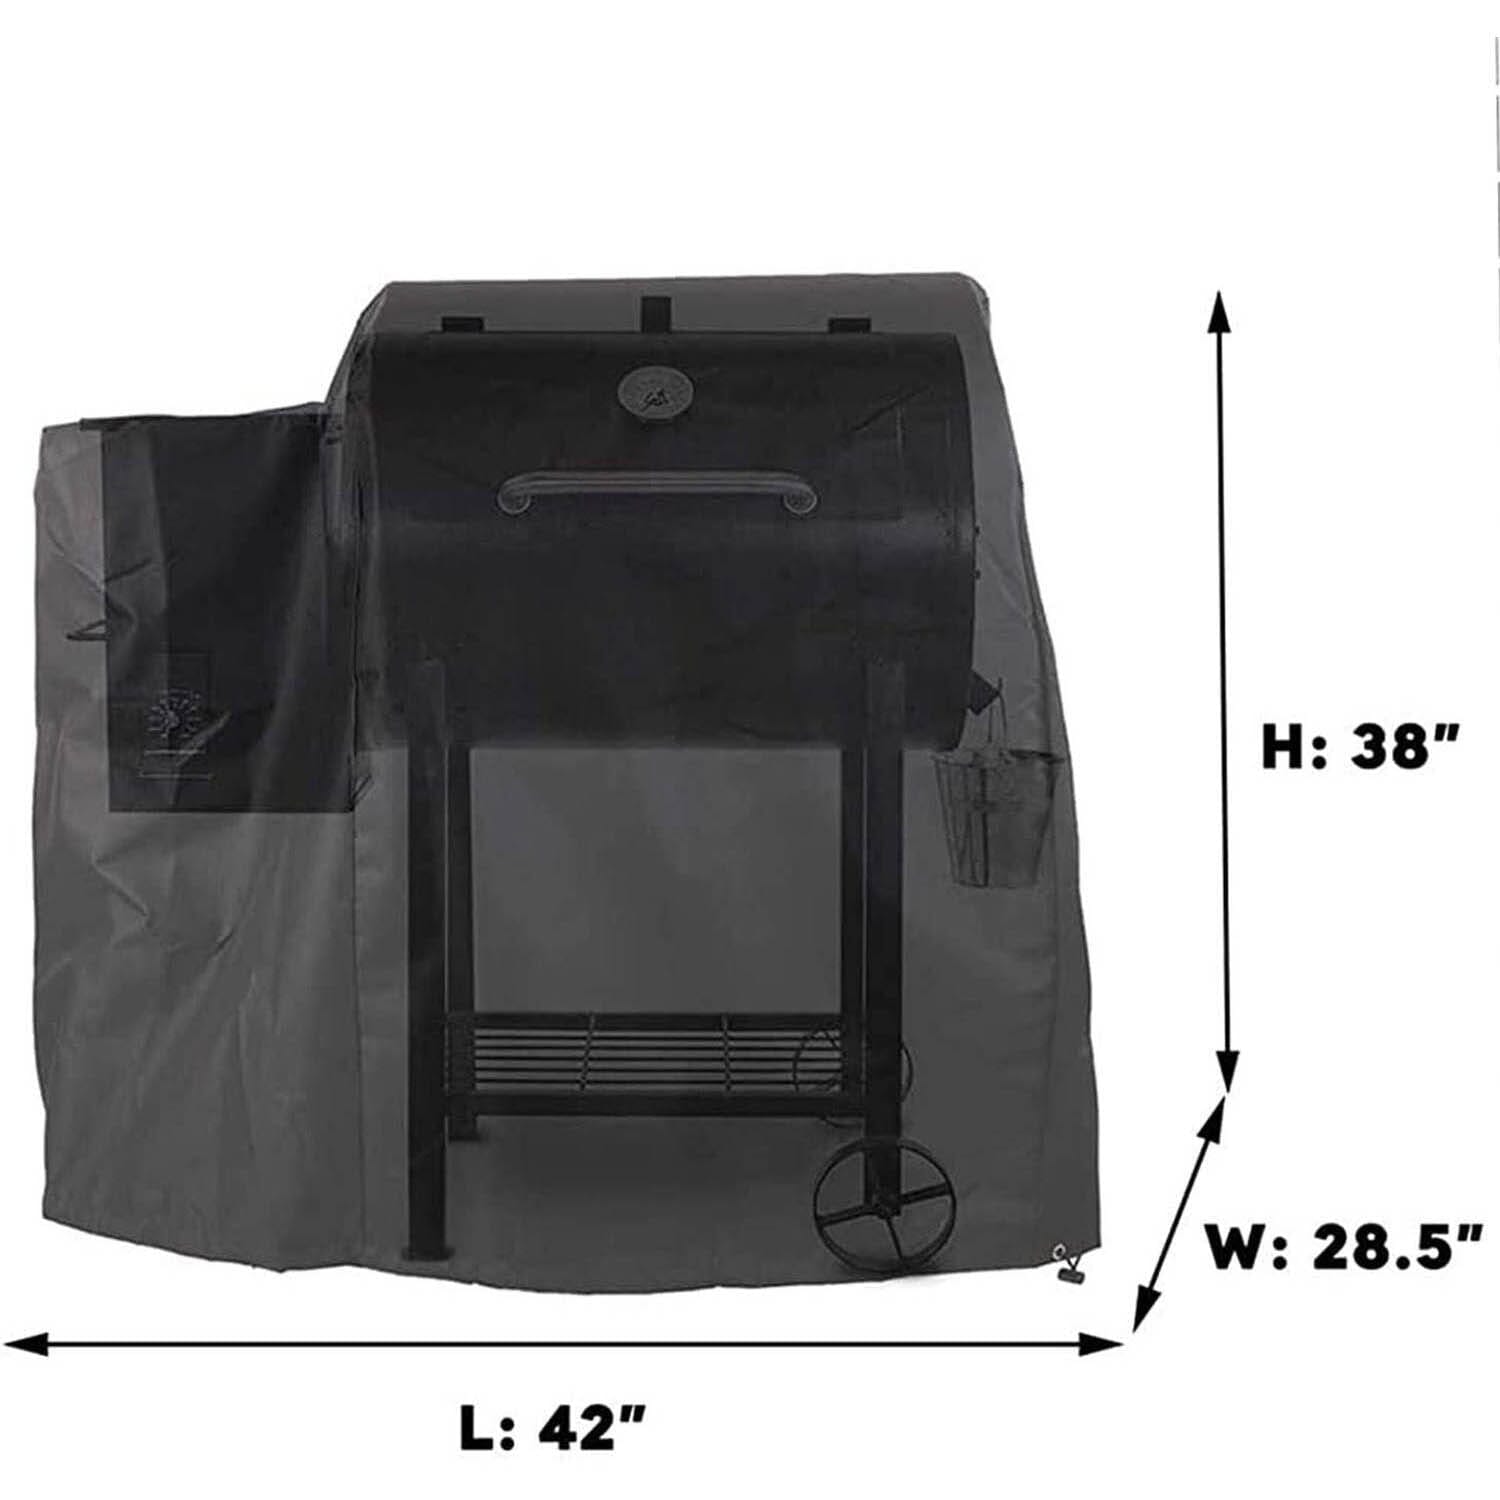 QuliMetal 73700 Grill Cover For Pit Boss 700FB, Classic 700